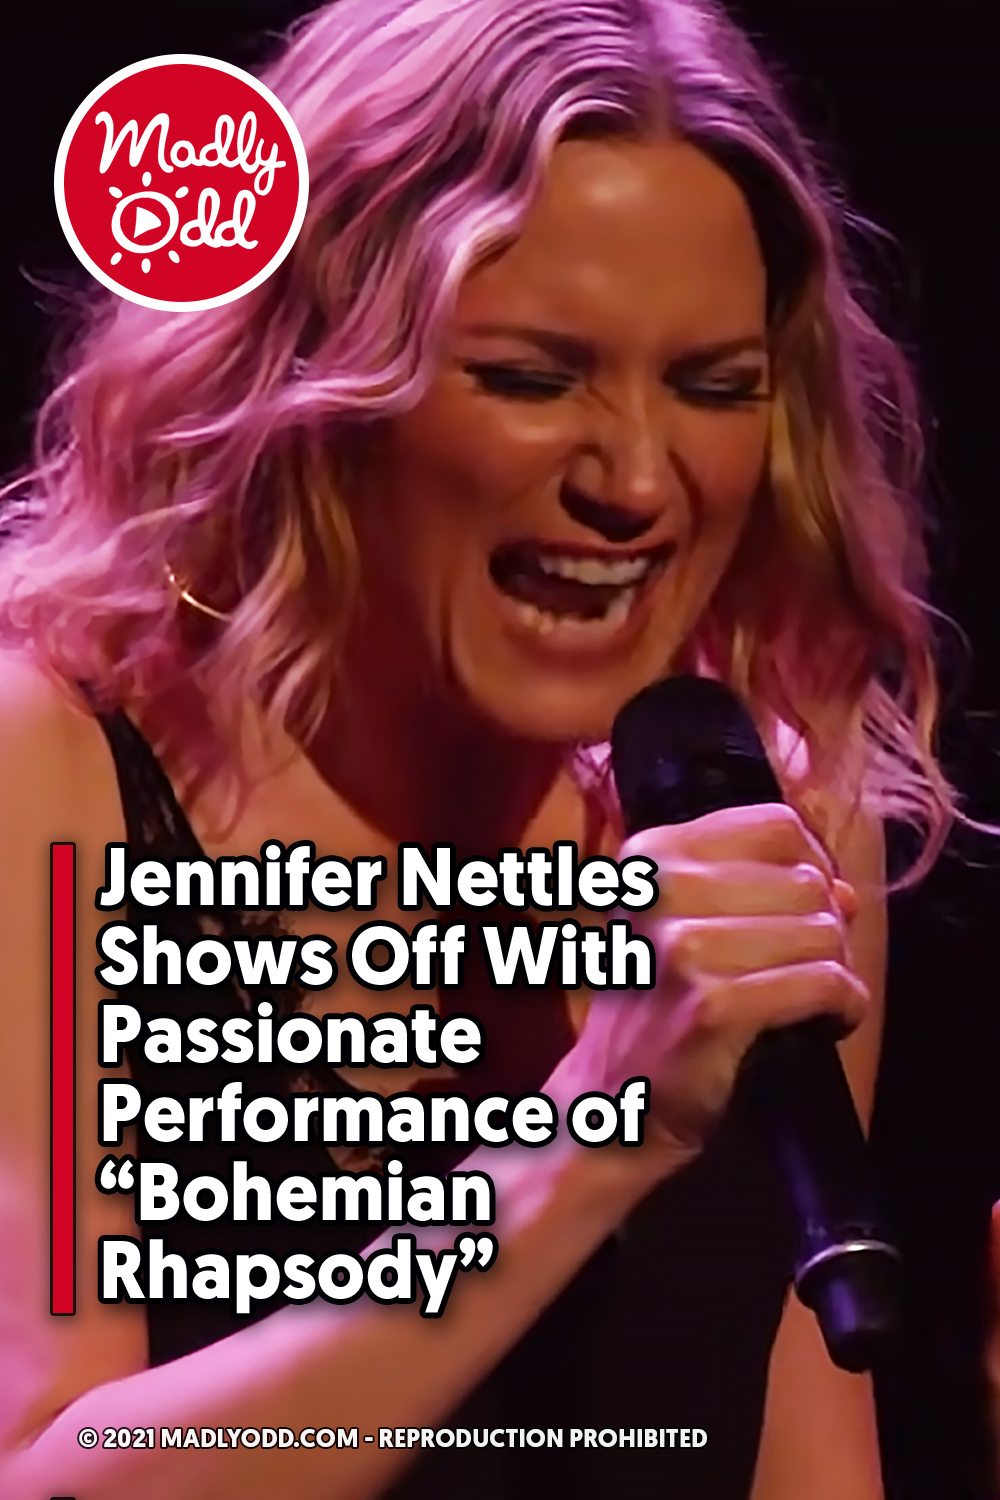 Jennifer Nettles Shows Off With Passionate Performance of “Bohemian Rhapsody”